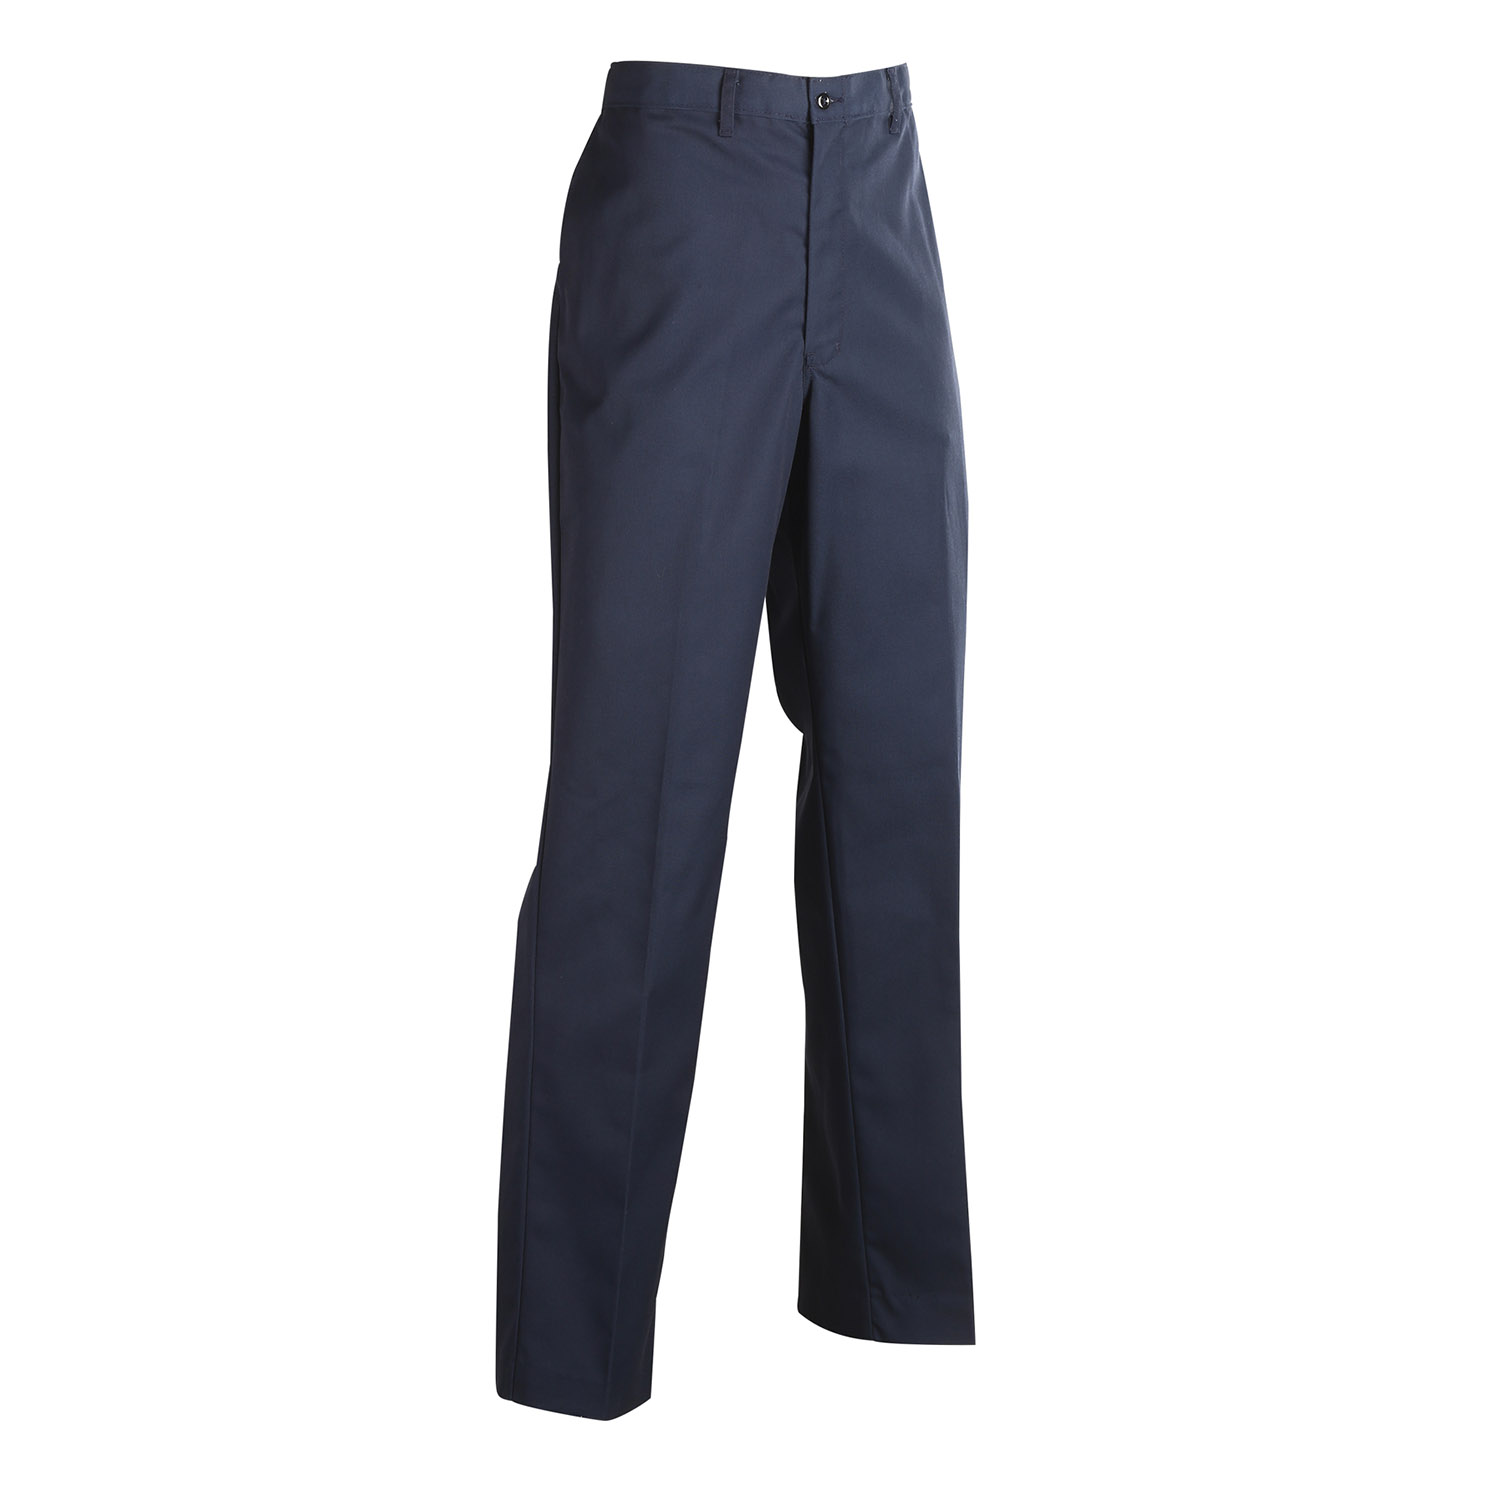 Postal Pants for Mailhandlers and Maintenance Personnel (P70